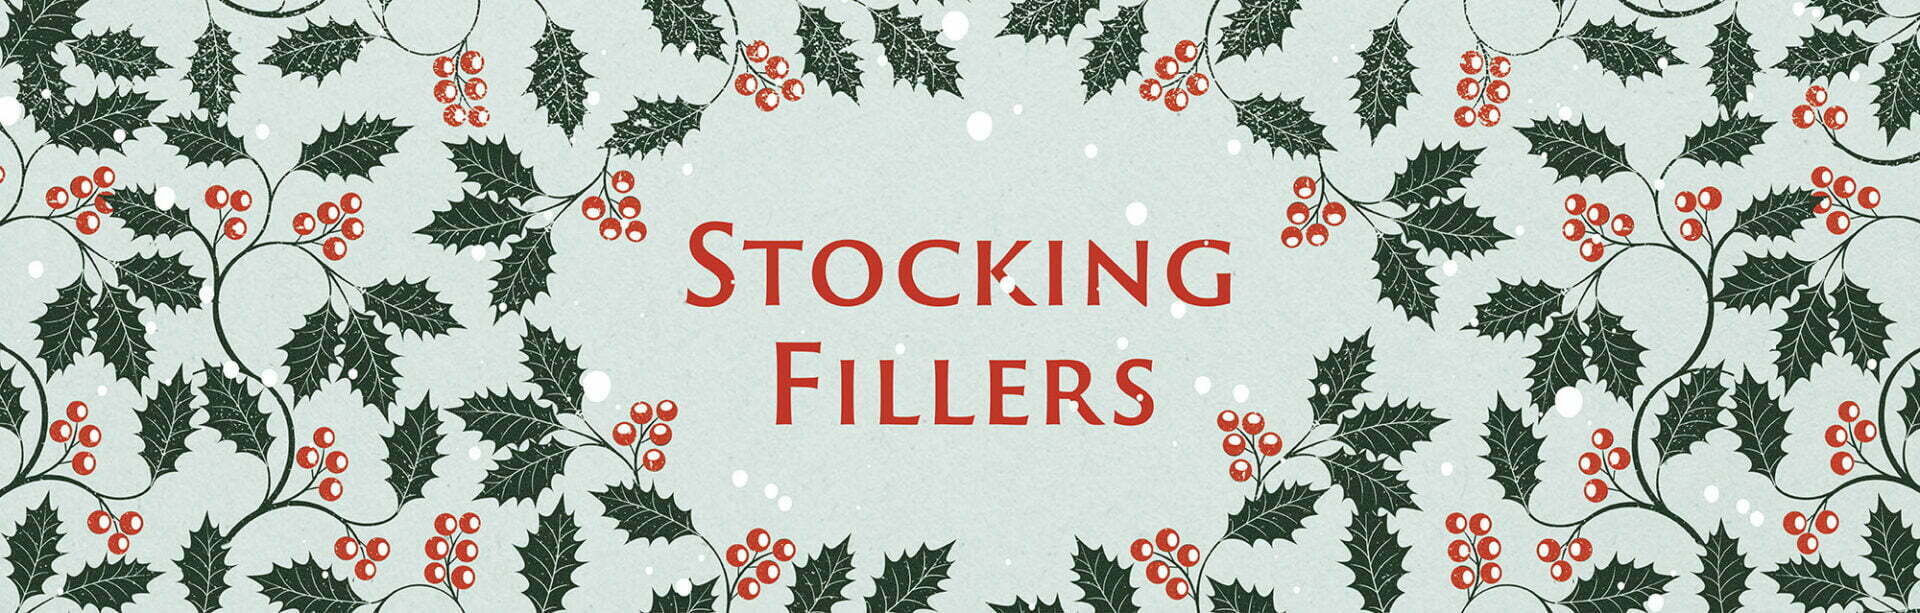 https://faber.wp.dev.diffusion.digital/wp-content/uploads/2021/11/Faber-Christmas-Gift-Guide-Stocking-Fillers-1920x613.jpg